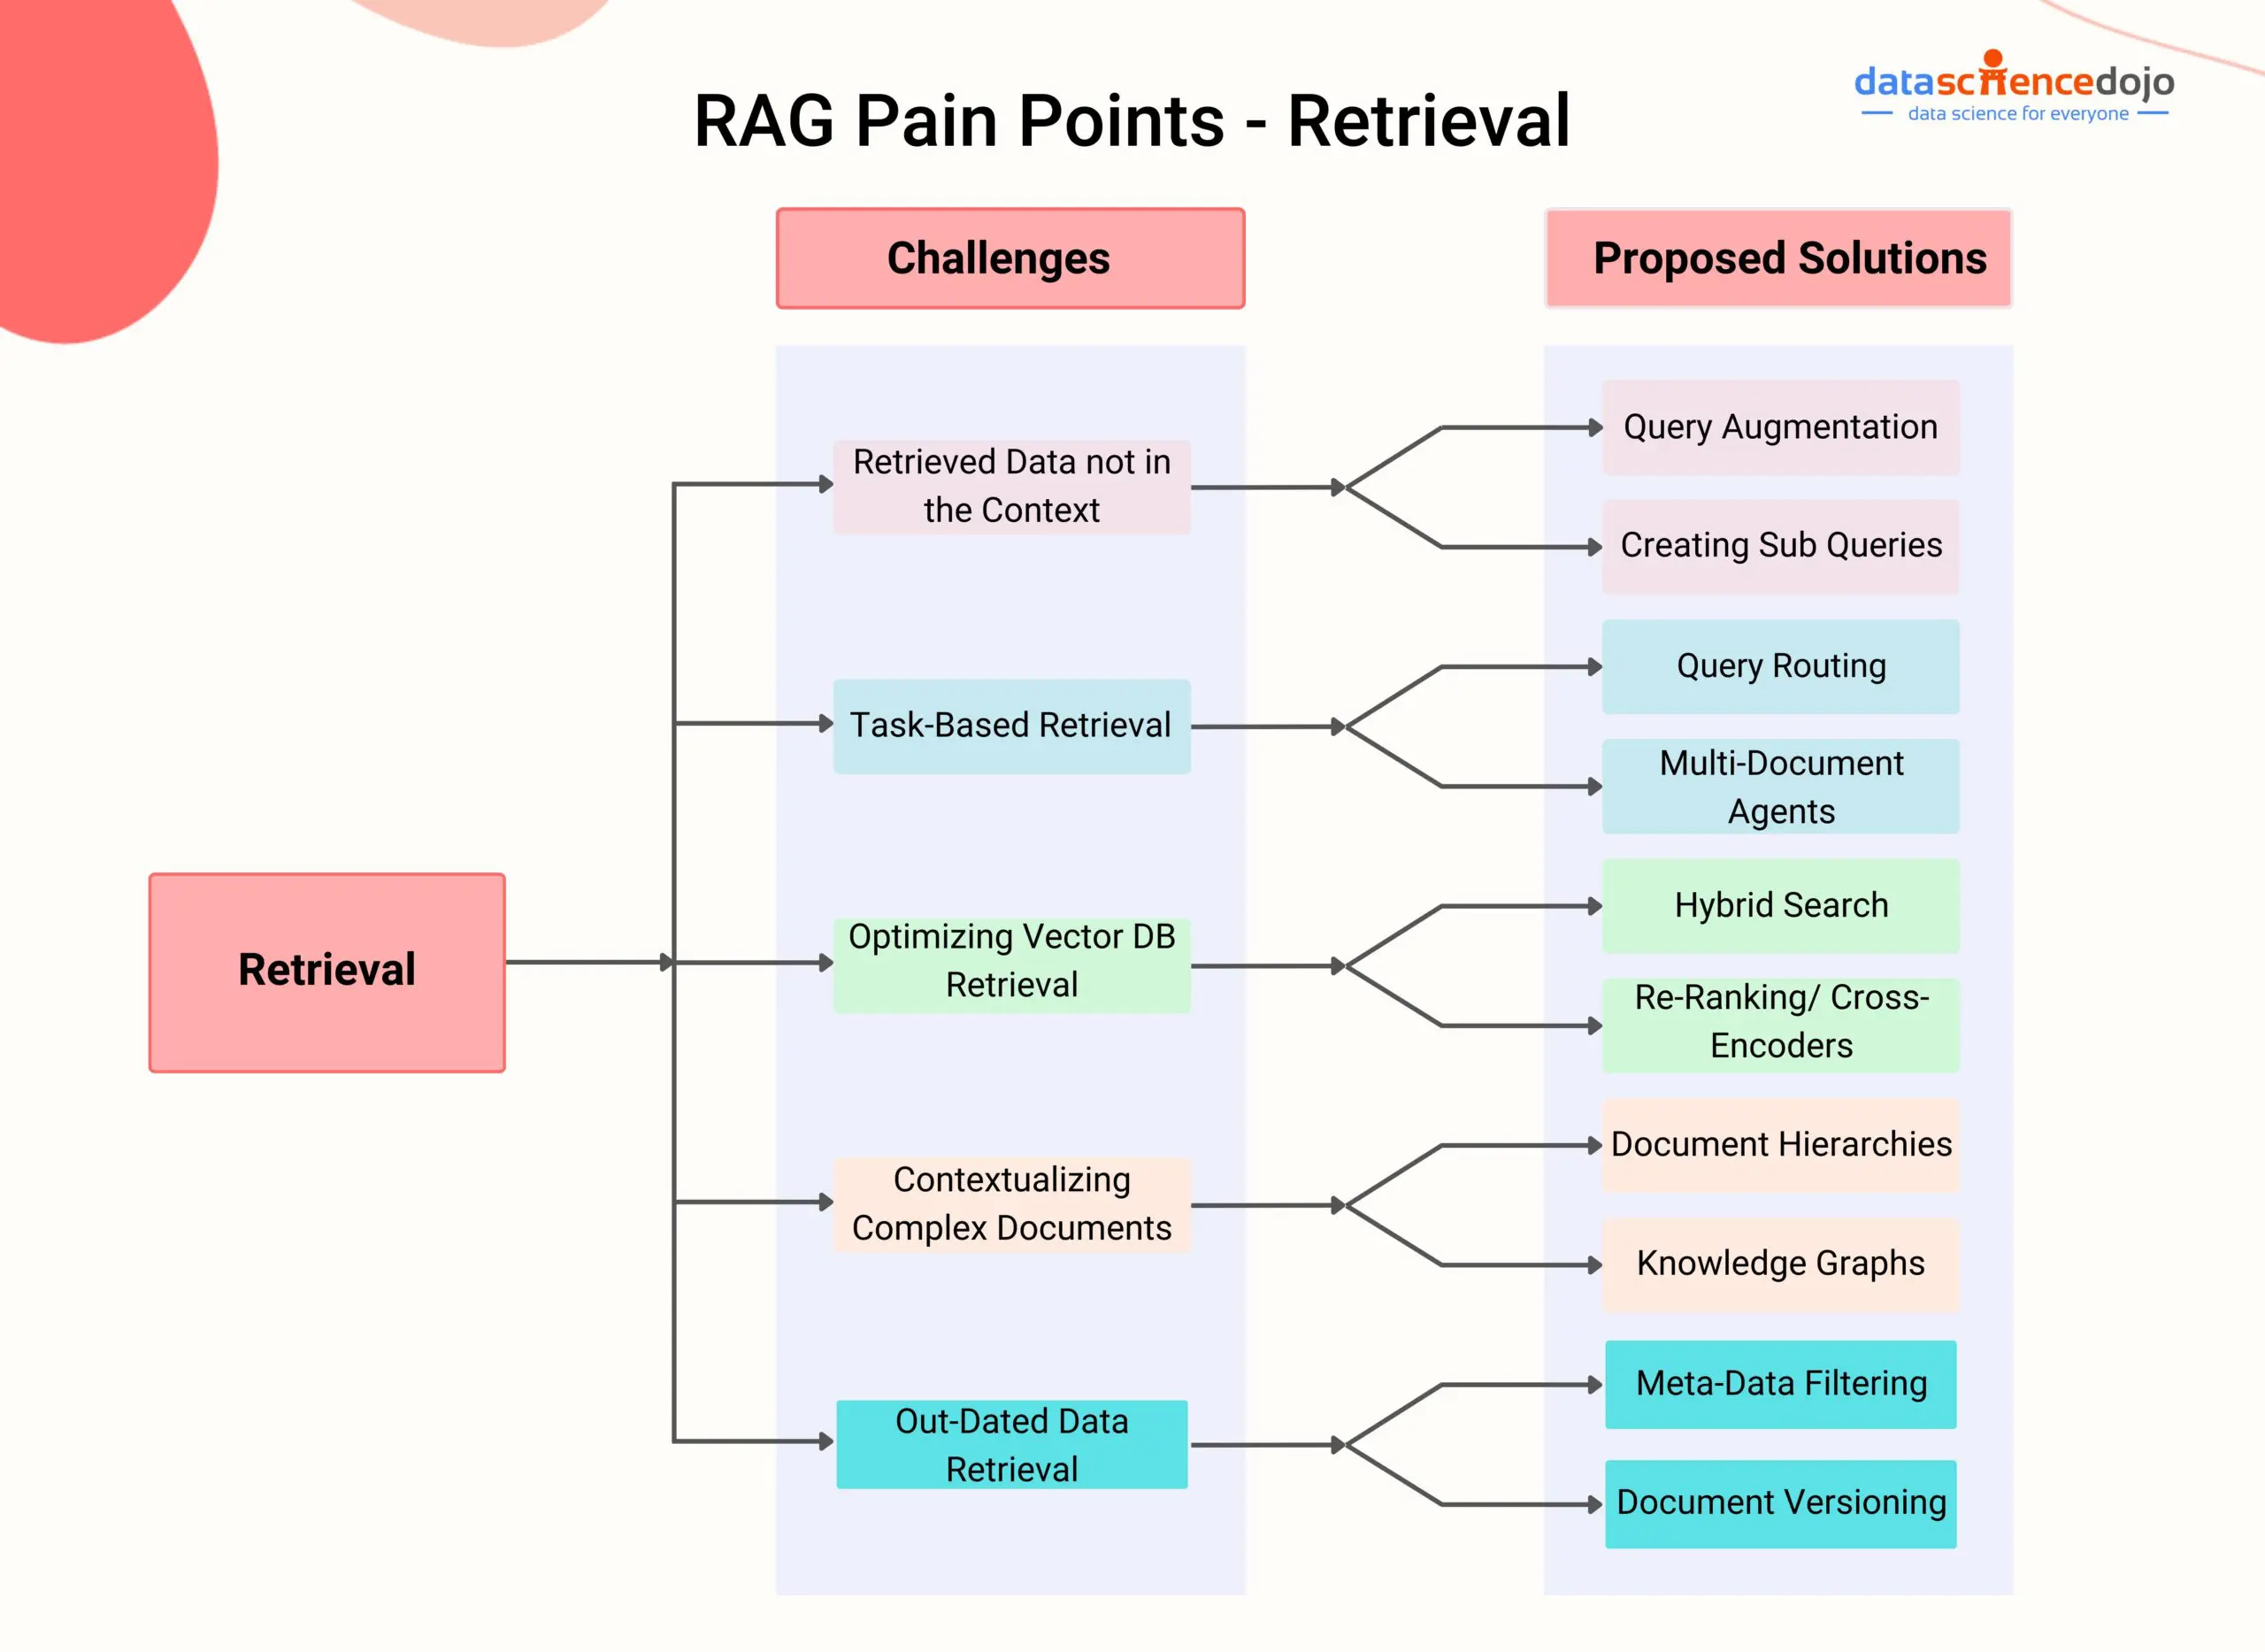 RAG Pain Paints and Solutions - Retrieval